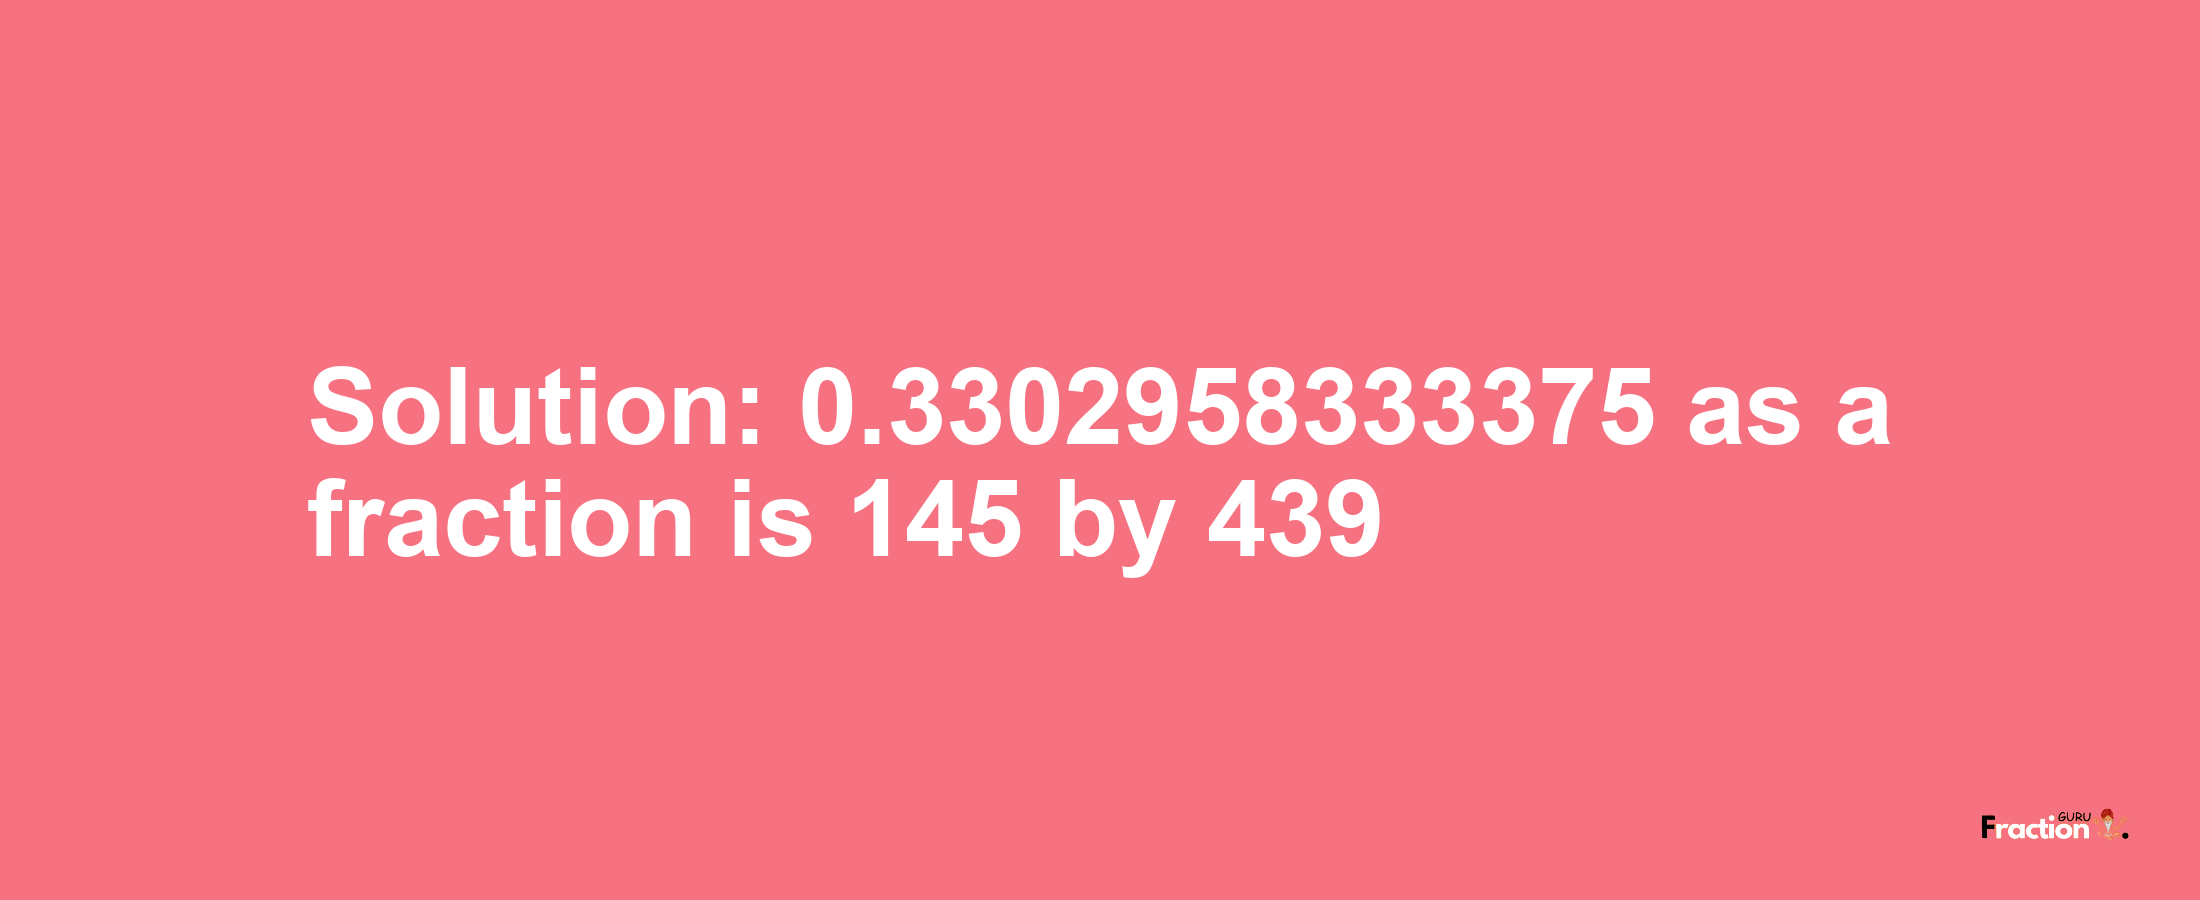 Solution:0.3302958333375 as a fraction is 145/439